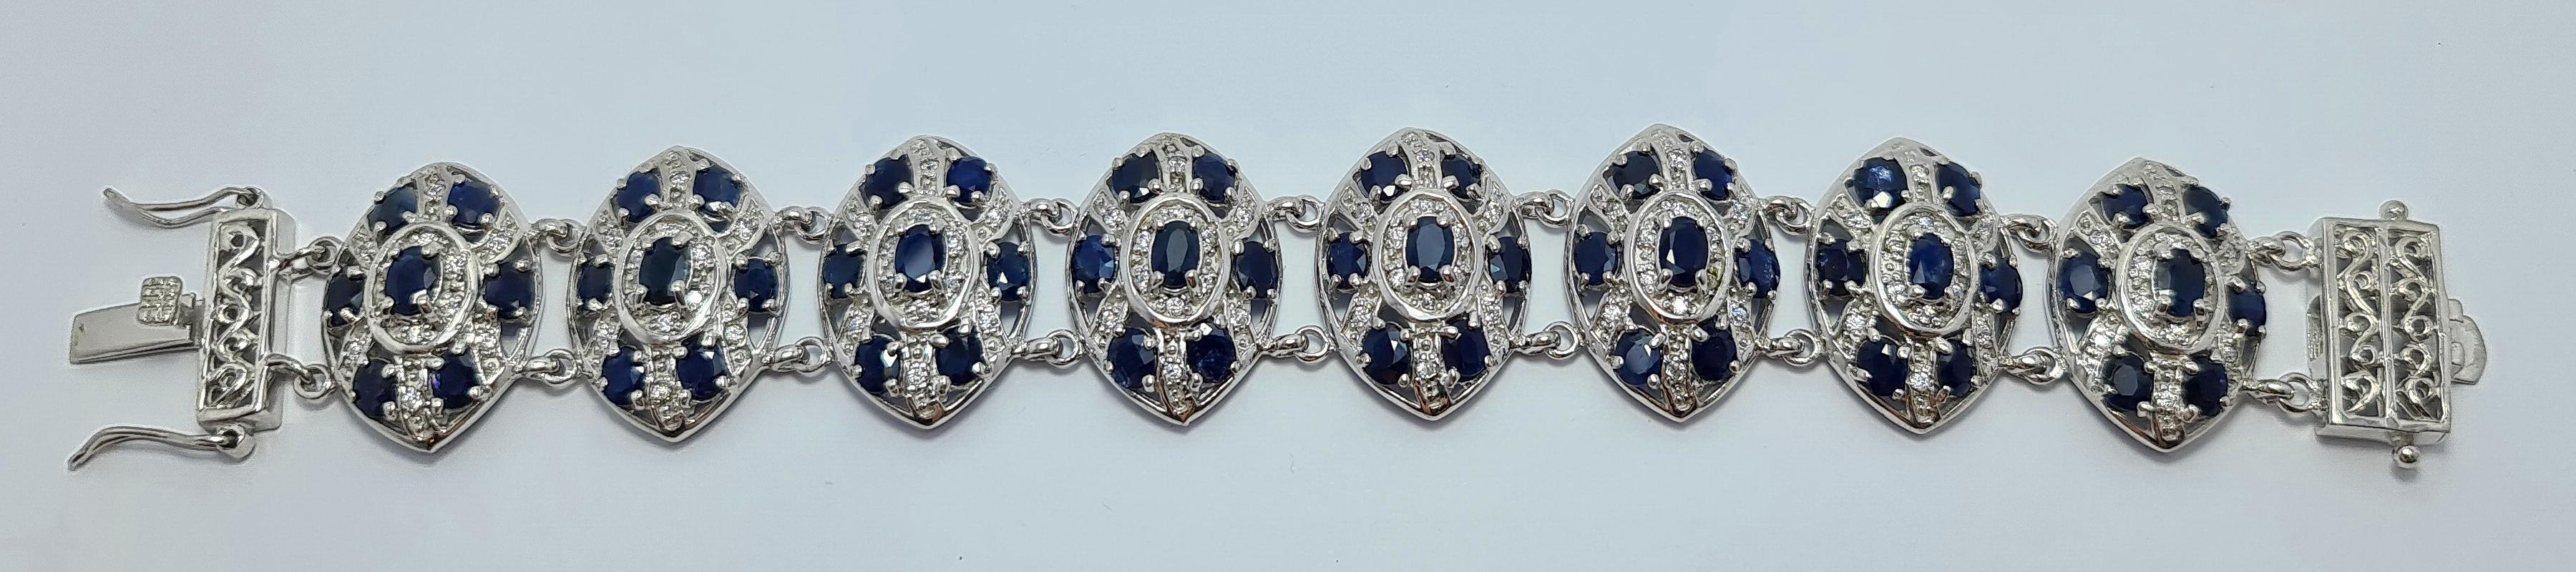 Natural Untreated Thai Kanchanaburi Sapphire Sapphires set in Solid 925 Sterling Silver Rhodium Plated Retro Art Deco Bracelet 

Length - 7.5 inches
Total weight of the bracelet: 50 grams
Total carats weight: 30 carats